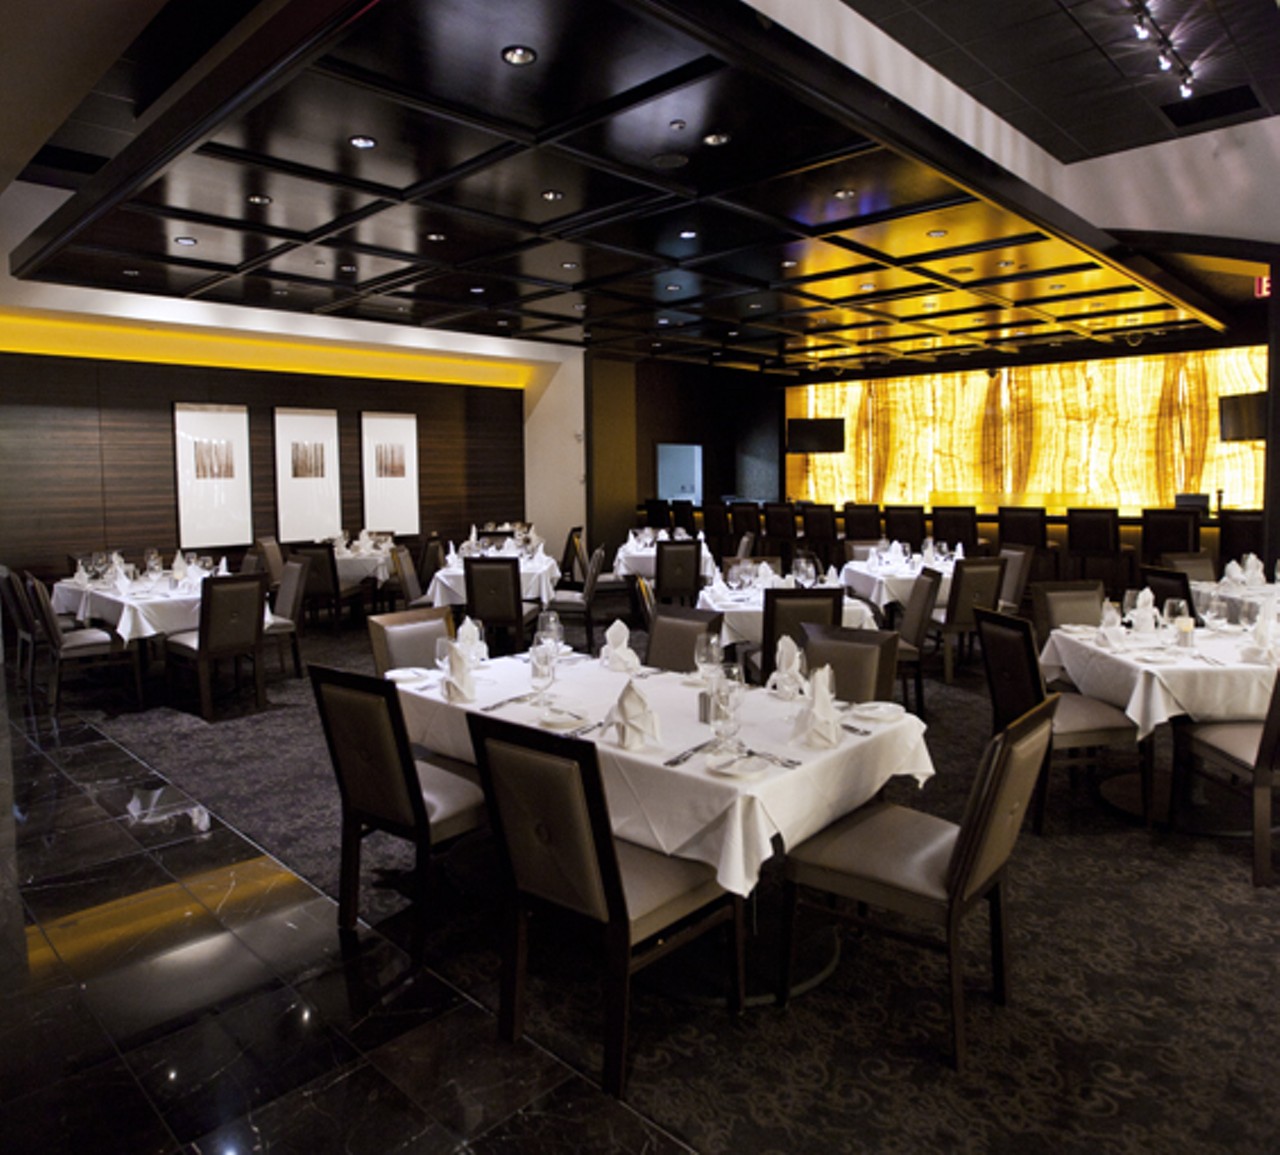 Another view of the dining room at Kelly English at Harrah's Casino in Maryland Heights.